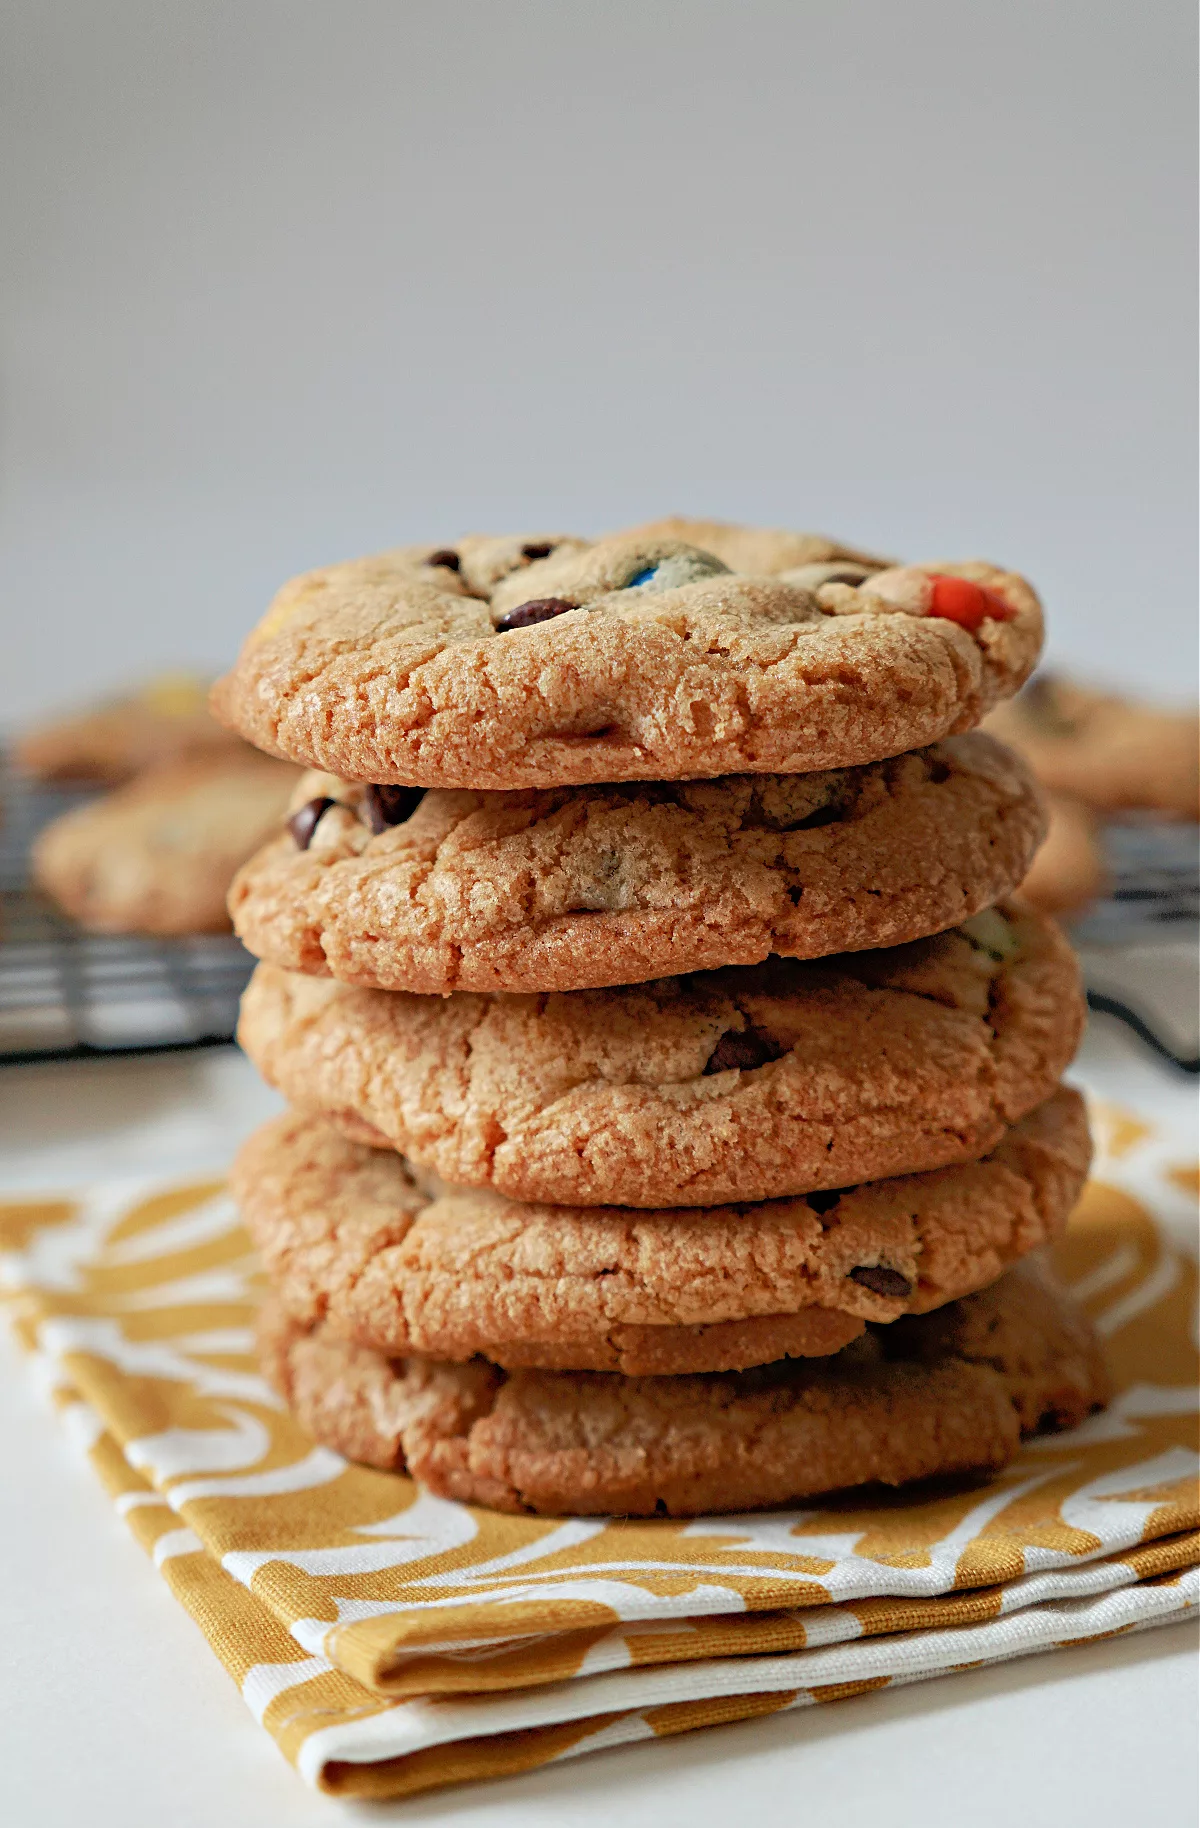 golden brown cookies with chocolate chips and M&Ms candies in a stack